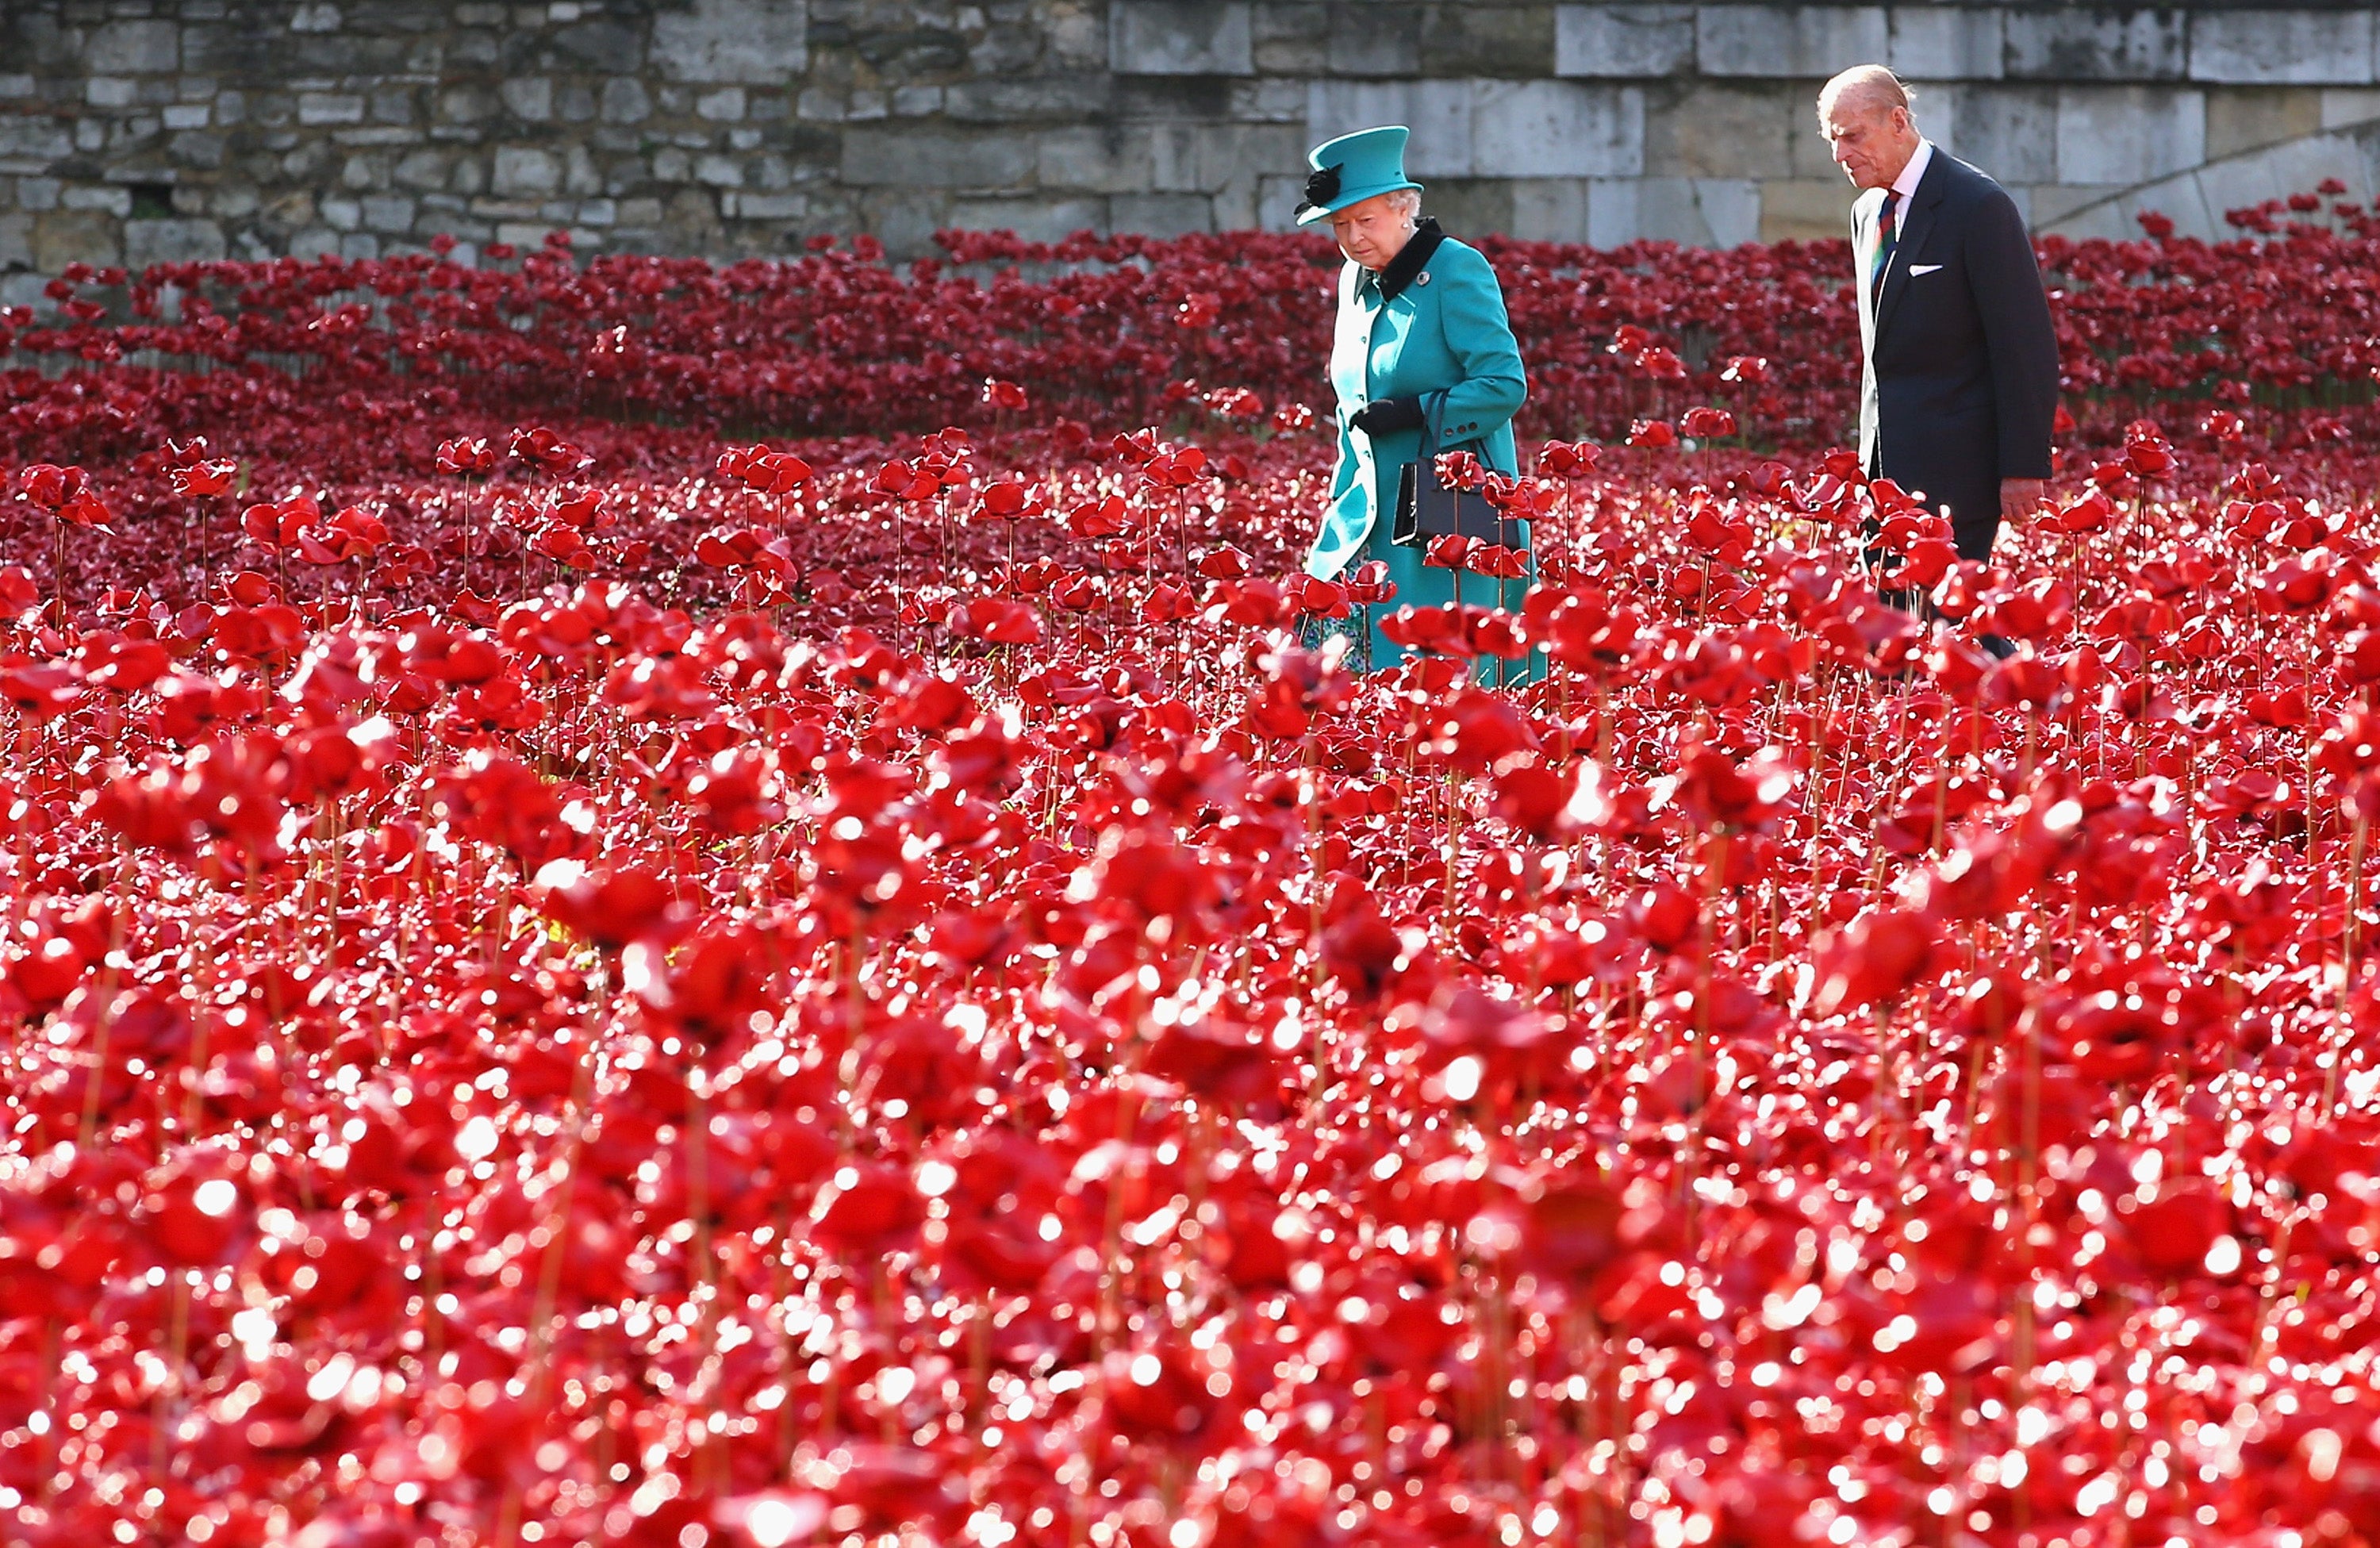 Queen Elizabeth II and Prince Philip, Duke of Edinburgh visit the Blood Swept Lands and Seas of Red evolving art installation at the Tower of London, 2014